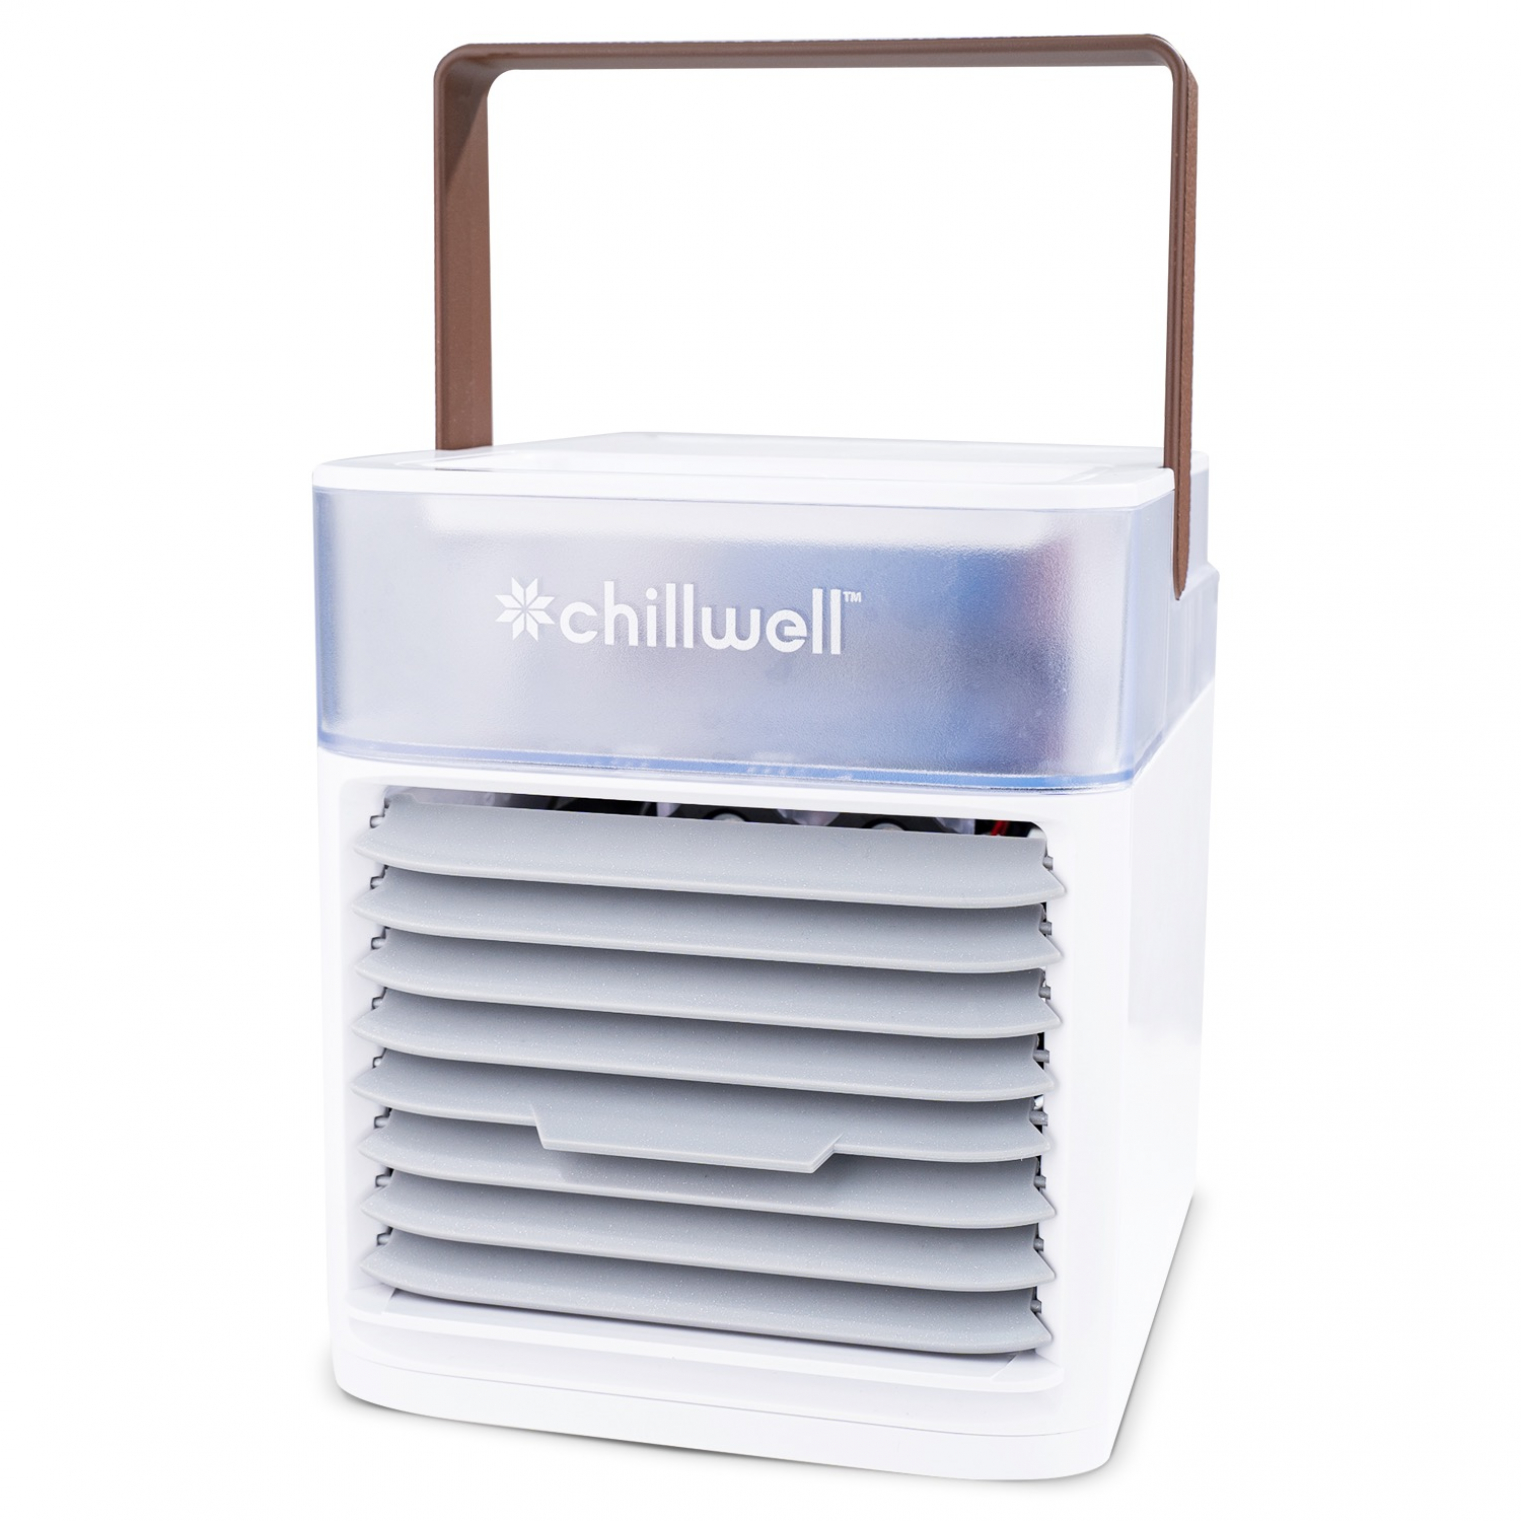 Chillwell Ac Review